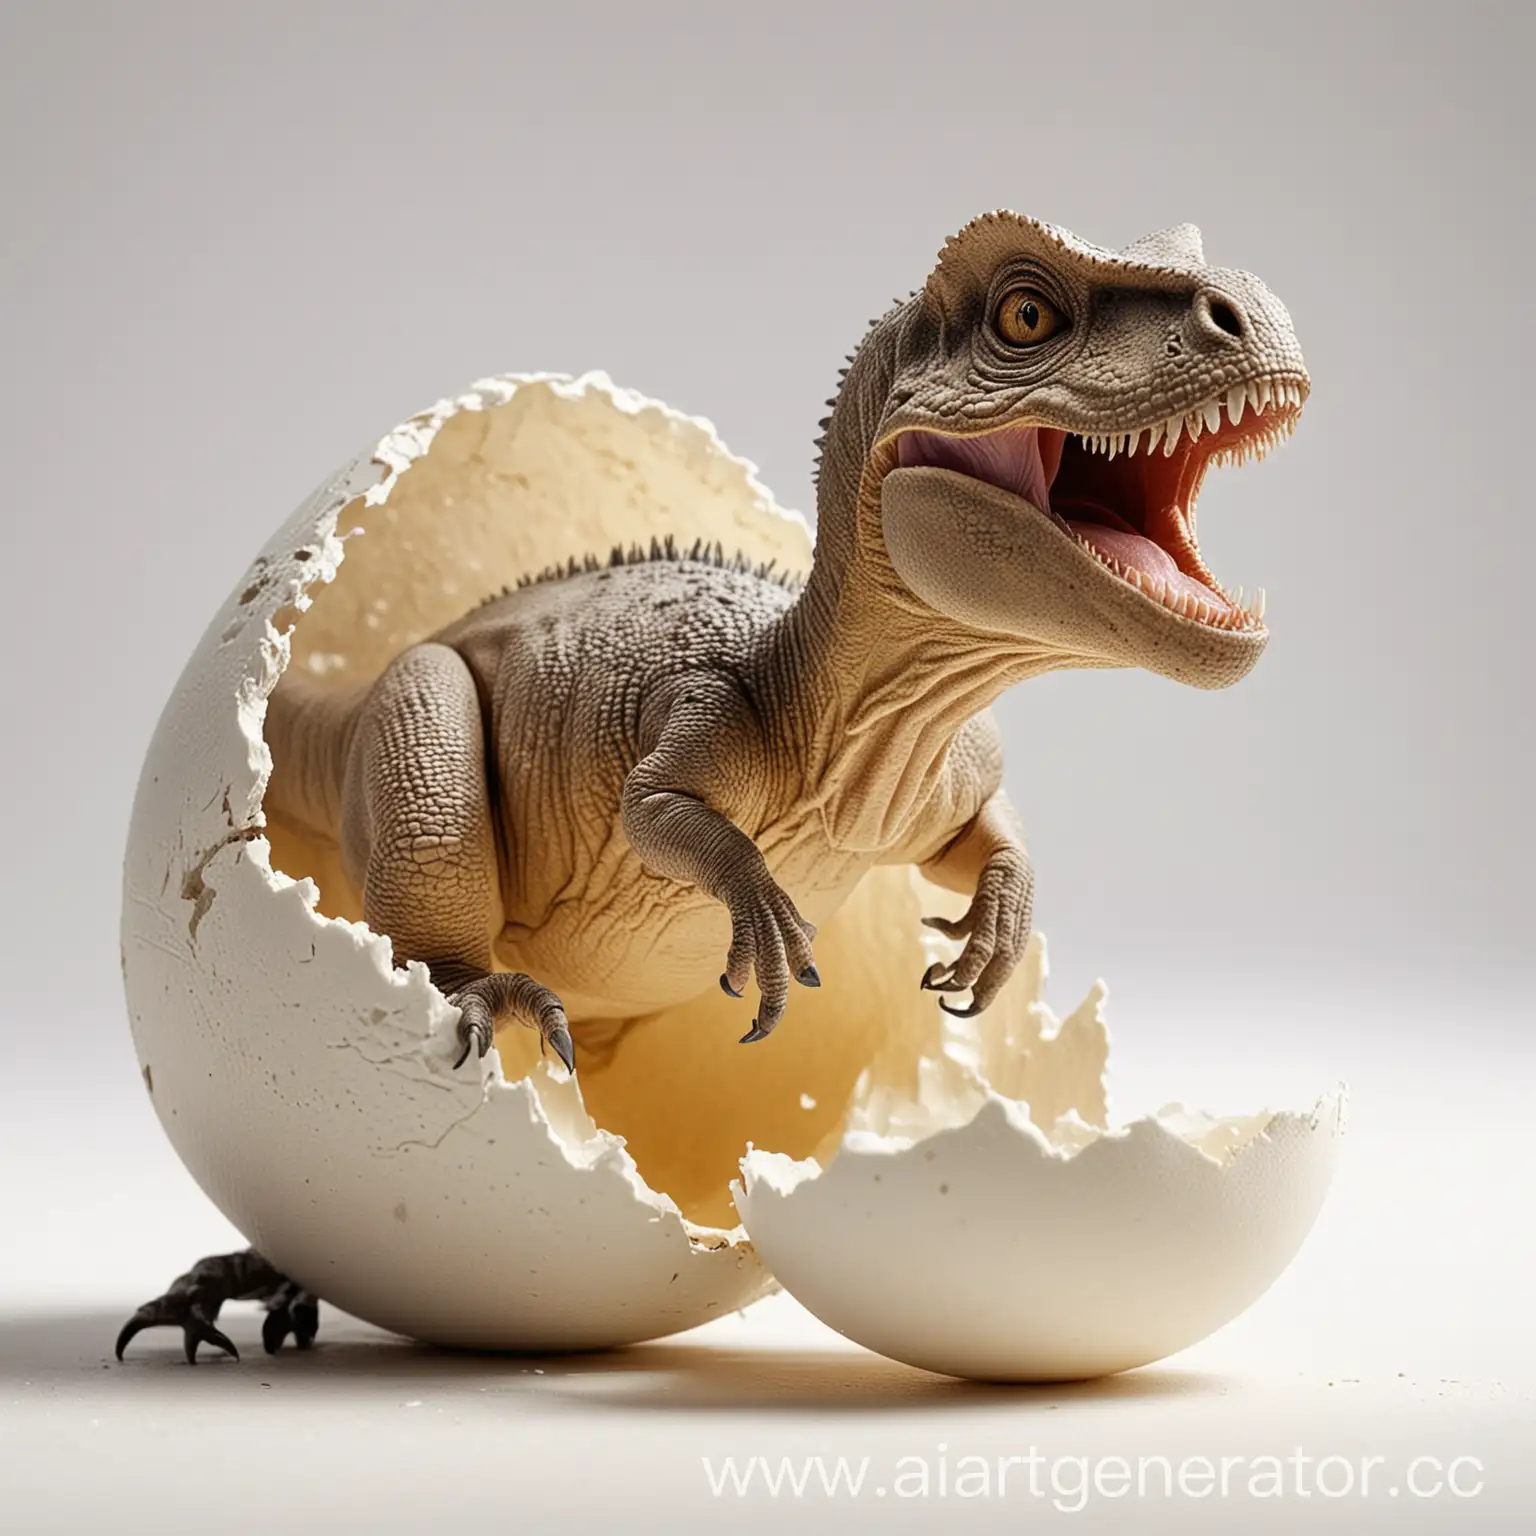 Baby-Rex-Dinosaur-Hatching-from-Egg-on-White-Background